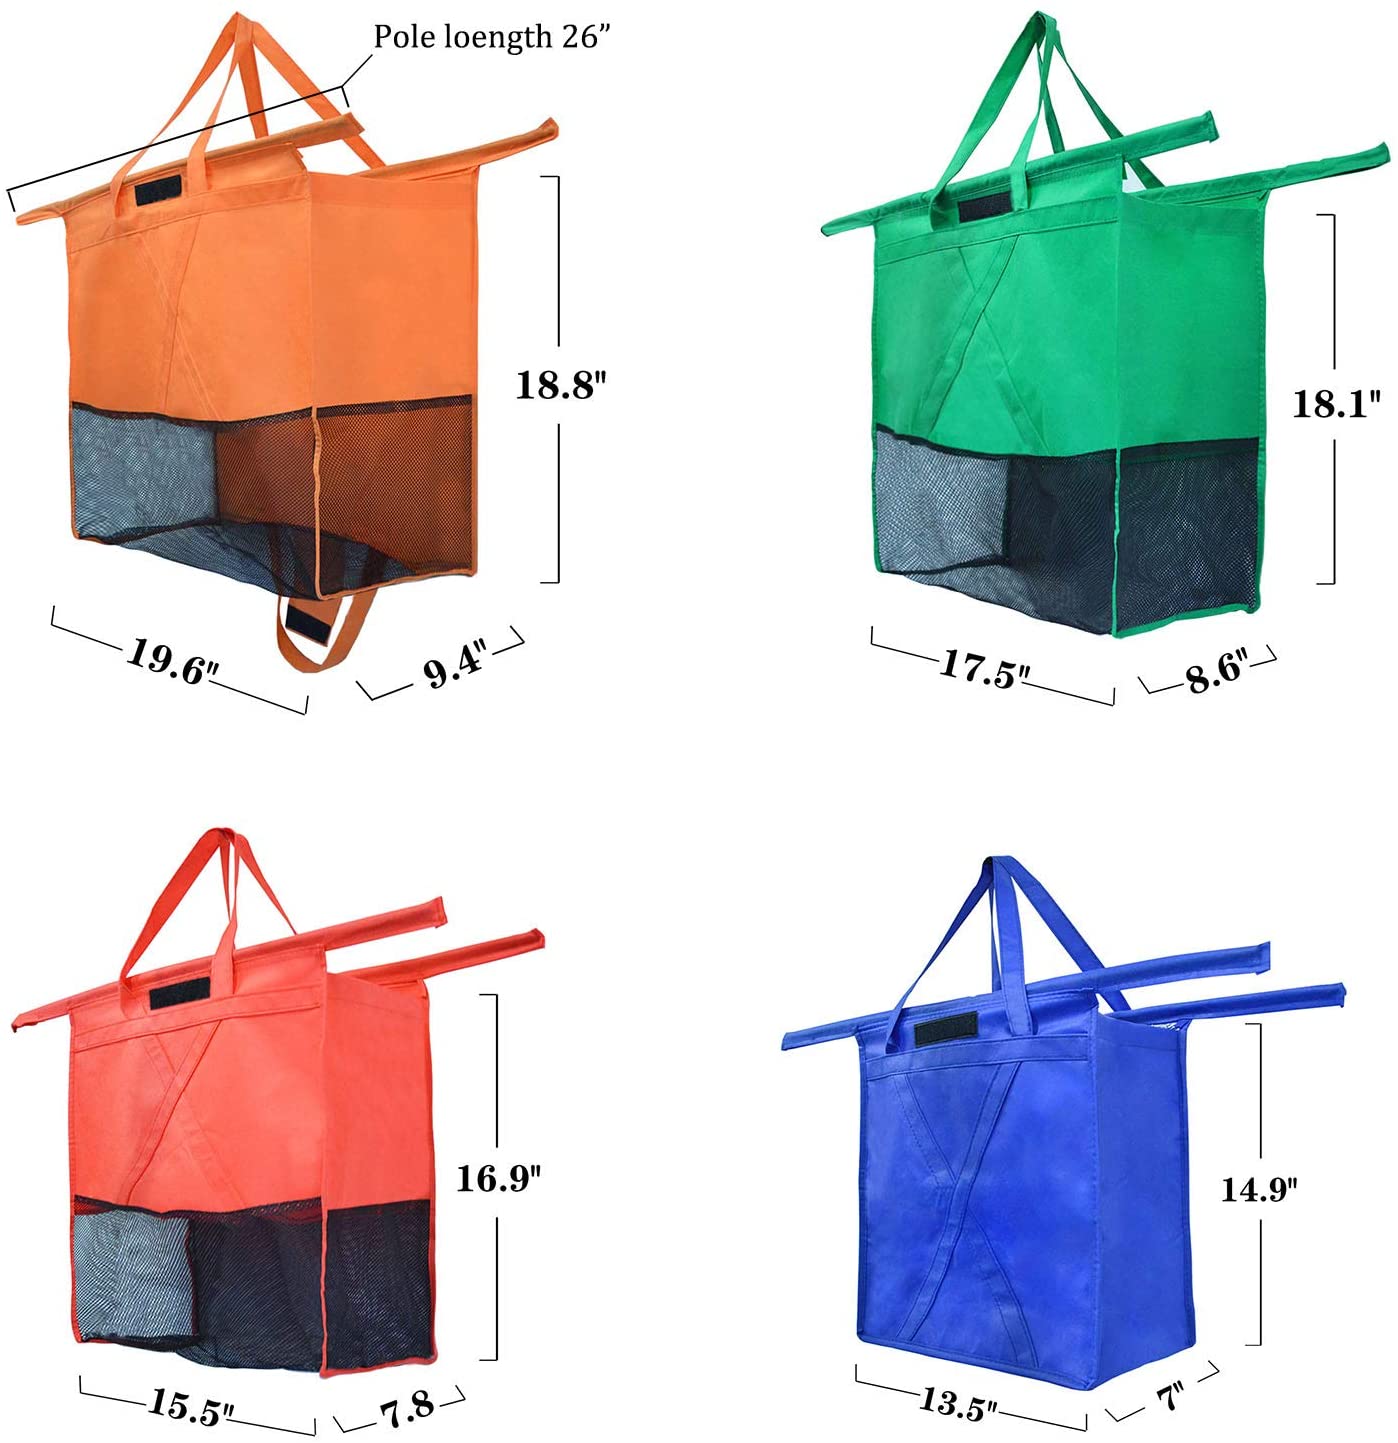 High-Quality Non-Woven Shopping Bags for Stroller